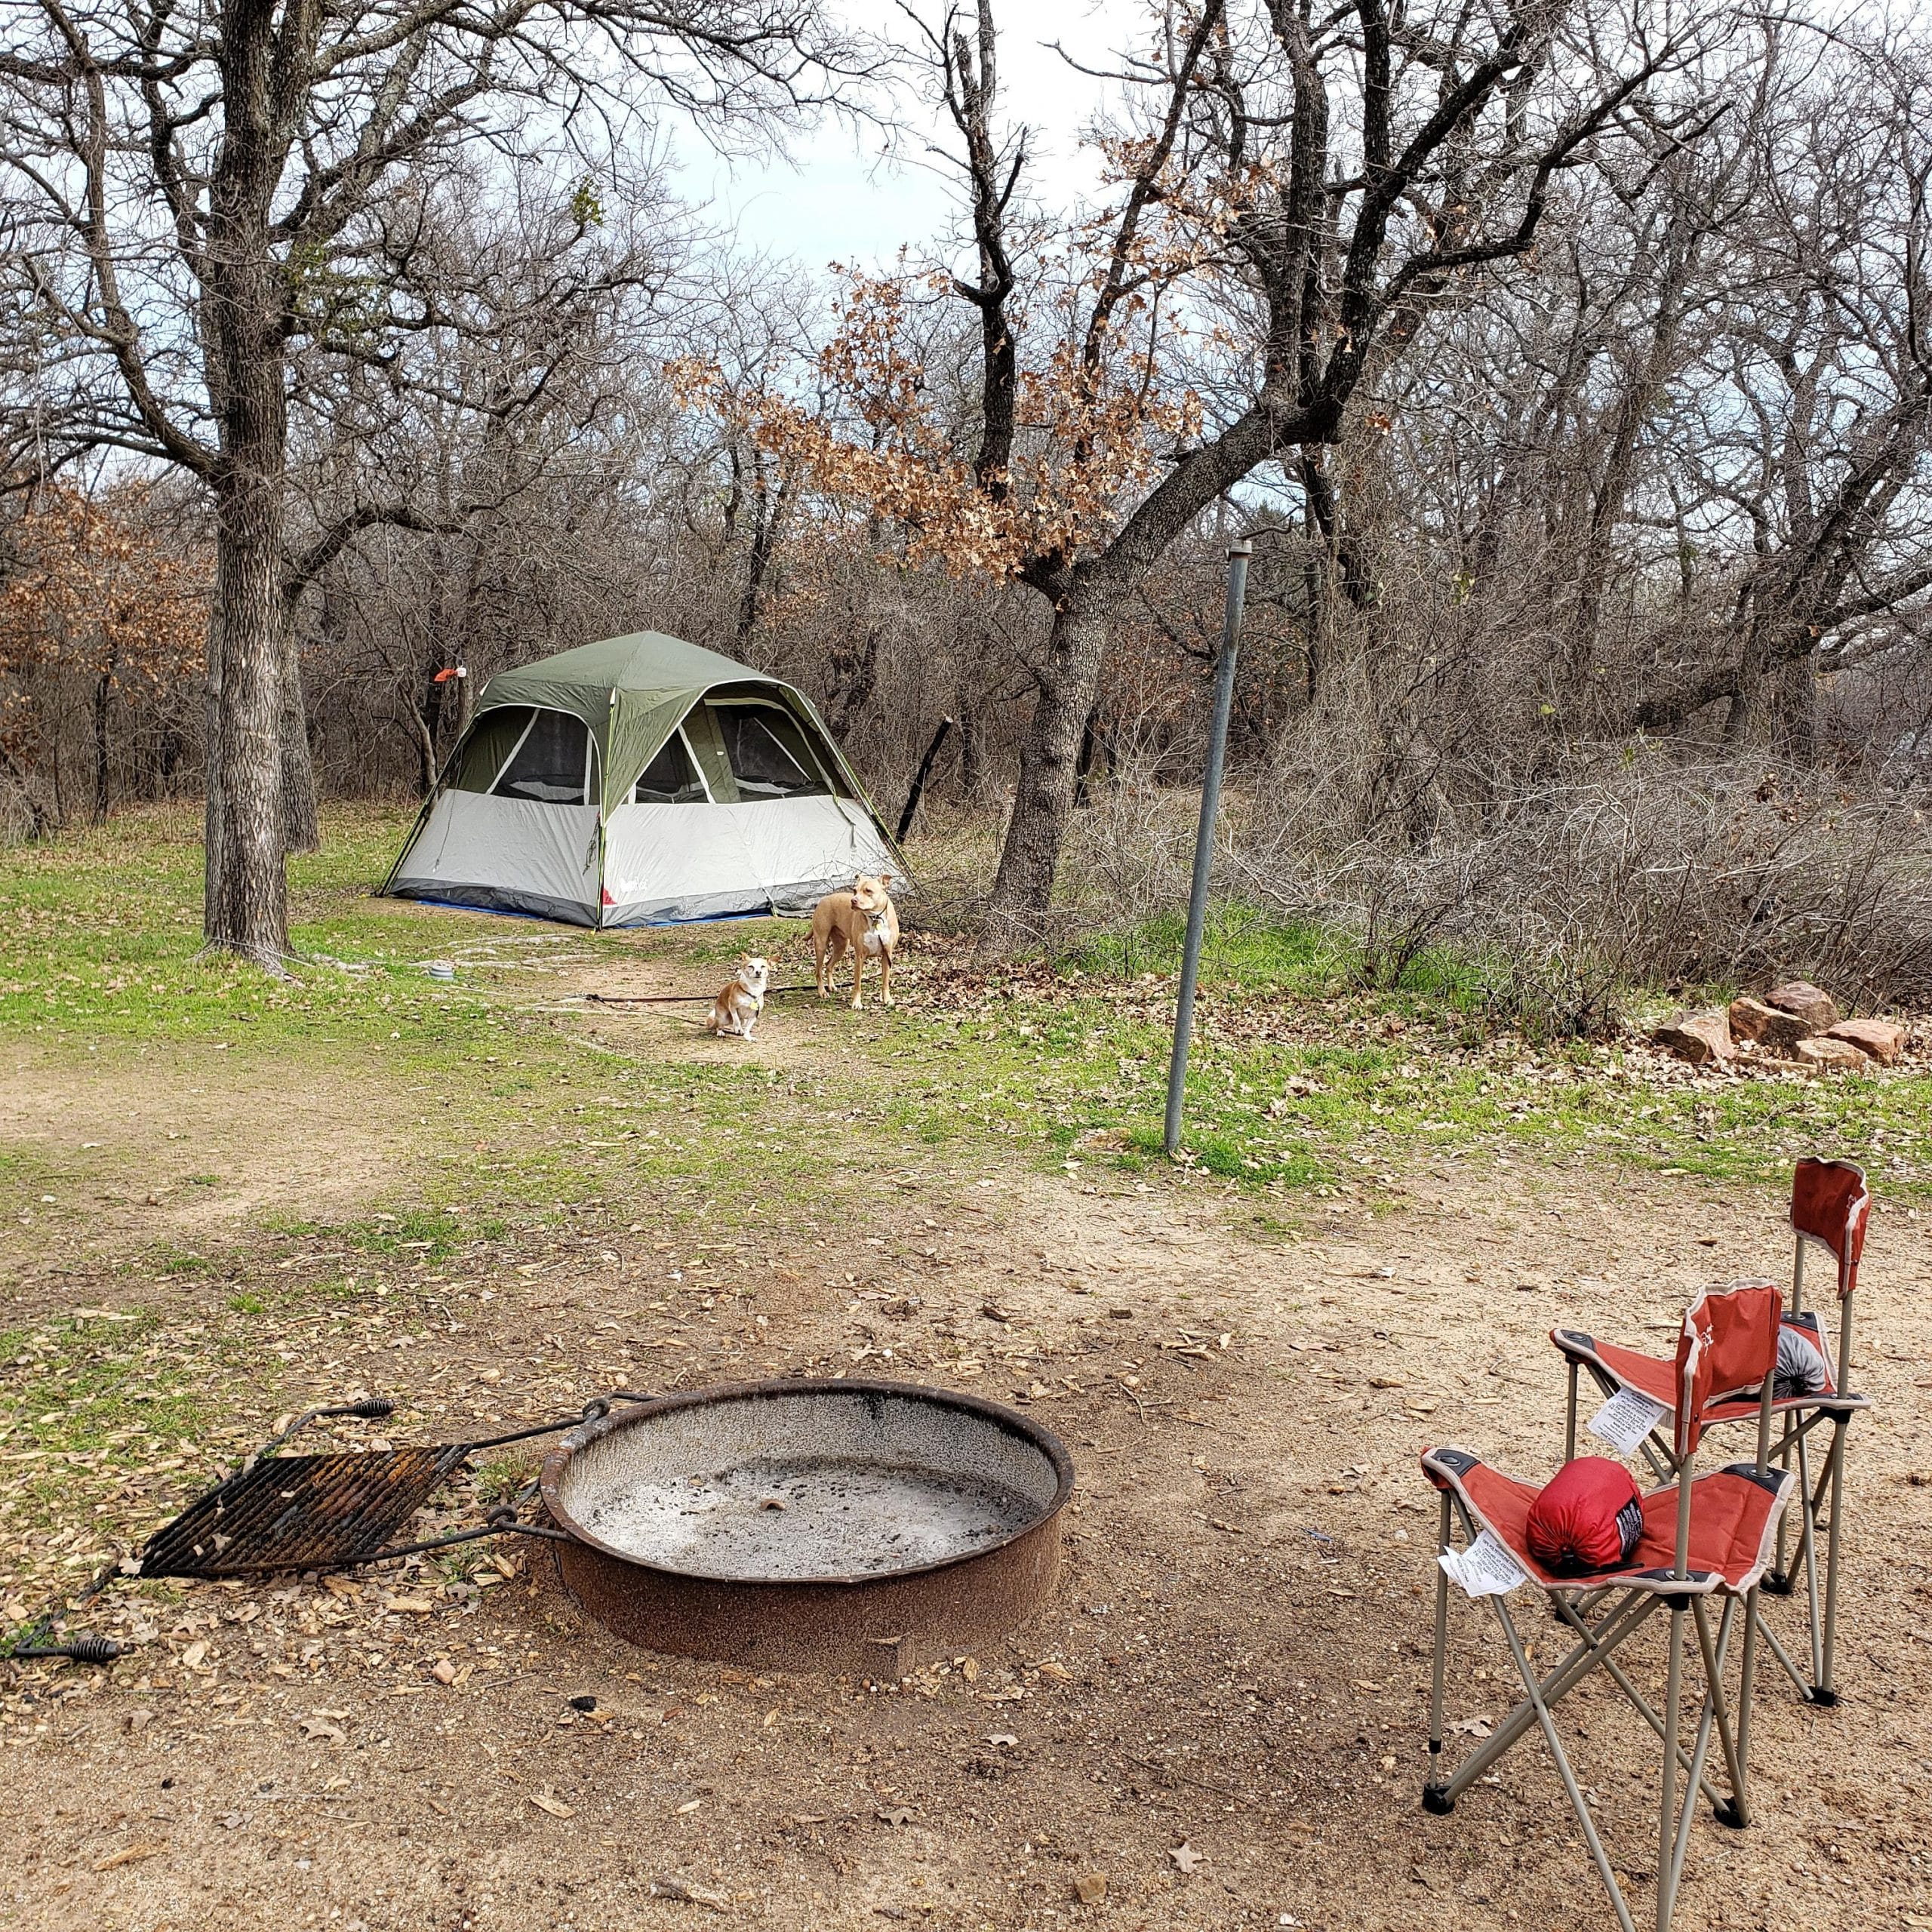 Weekend camping in cool, wet weather in Lake Mineral Wells, Tx calls ...